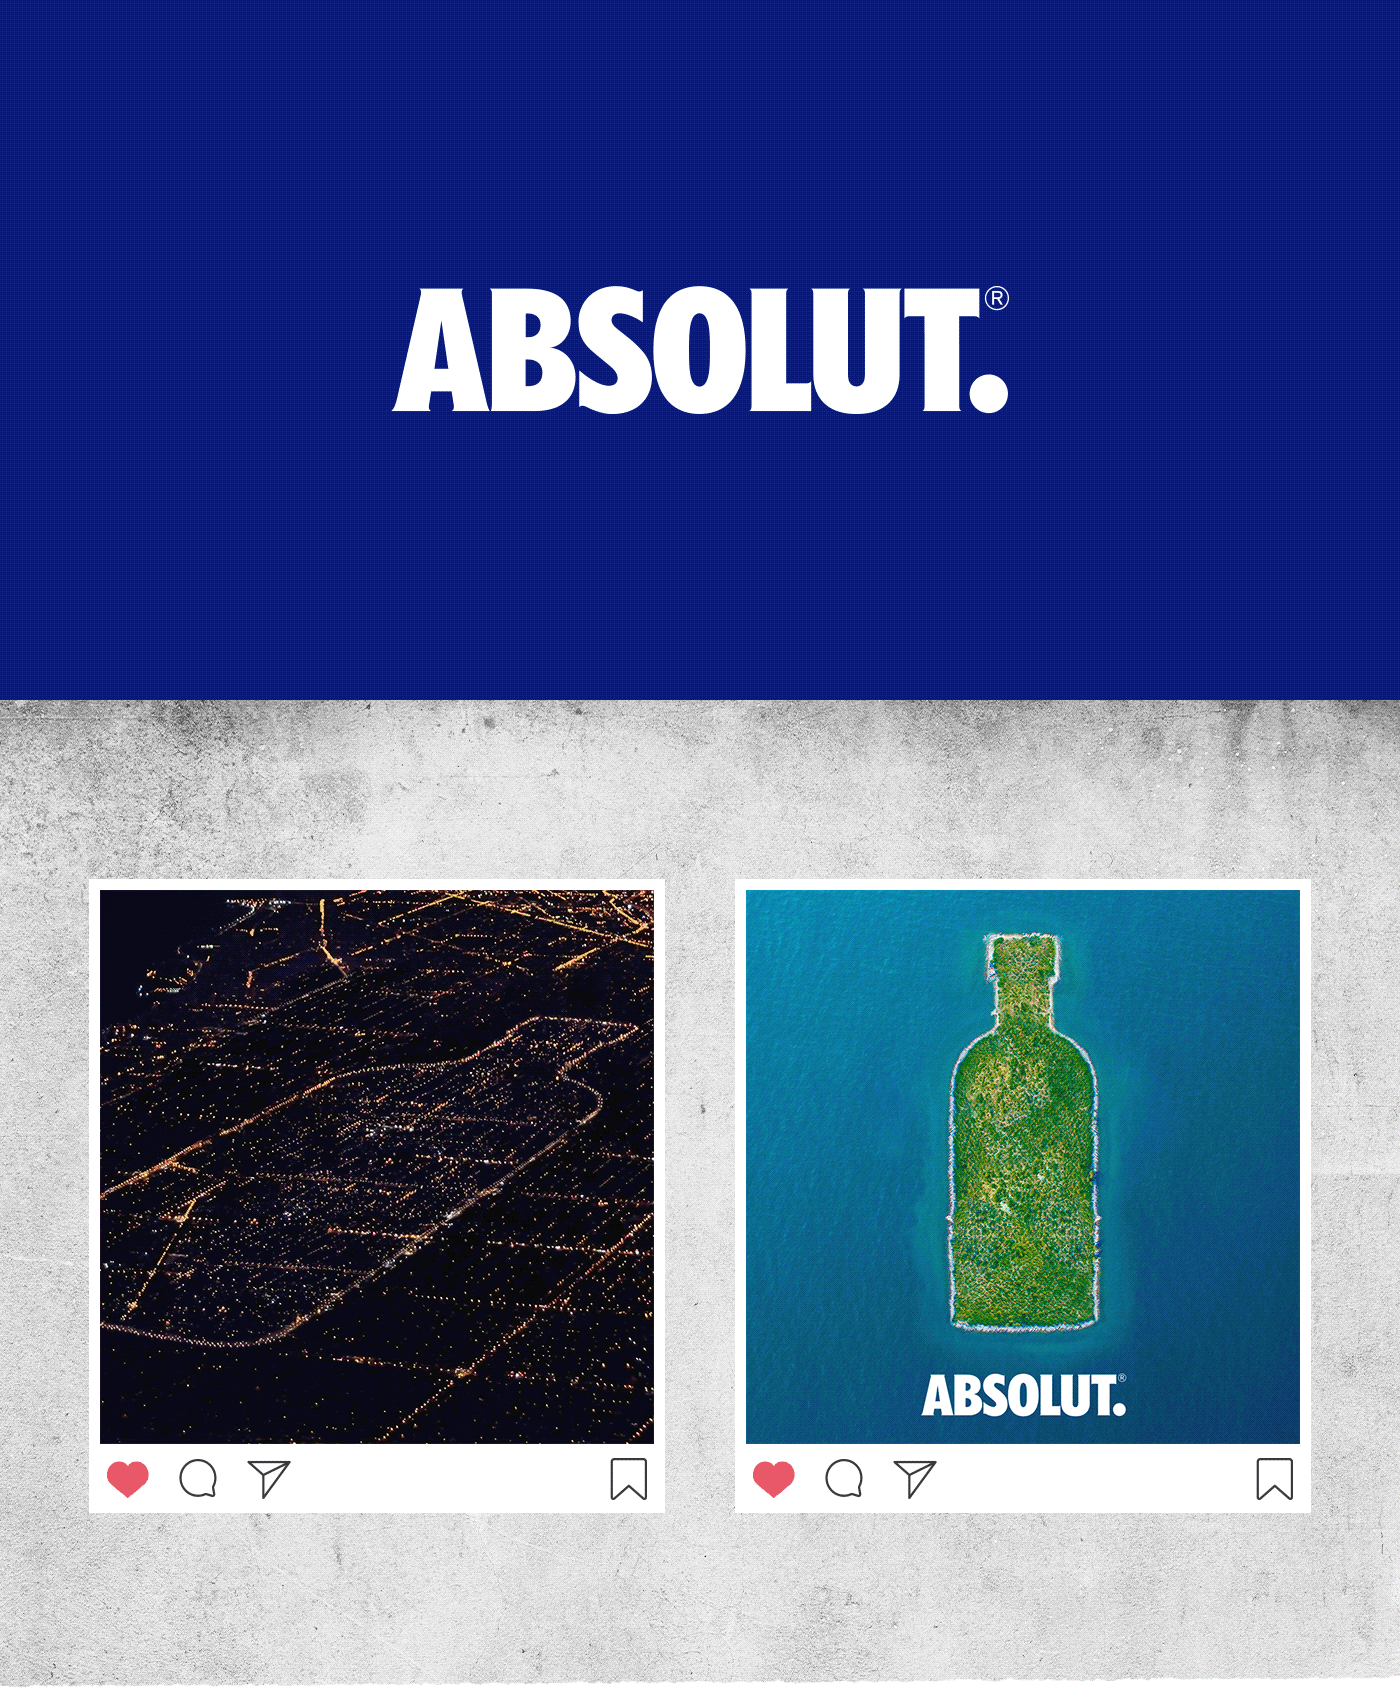 beefeater gin social media absolut Vodka alcohol